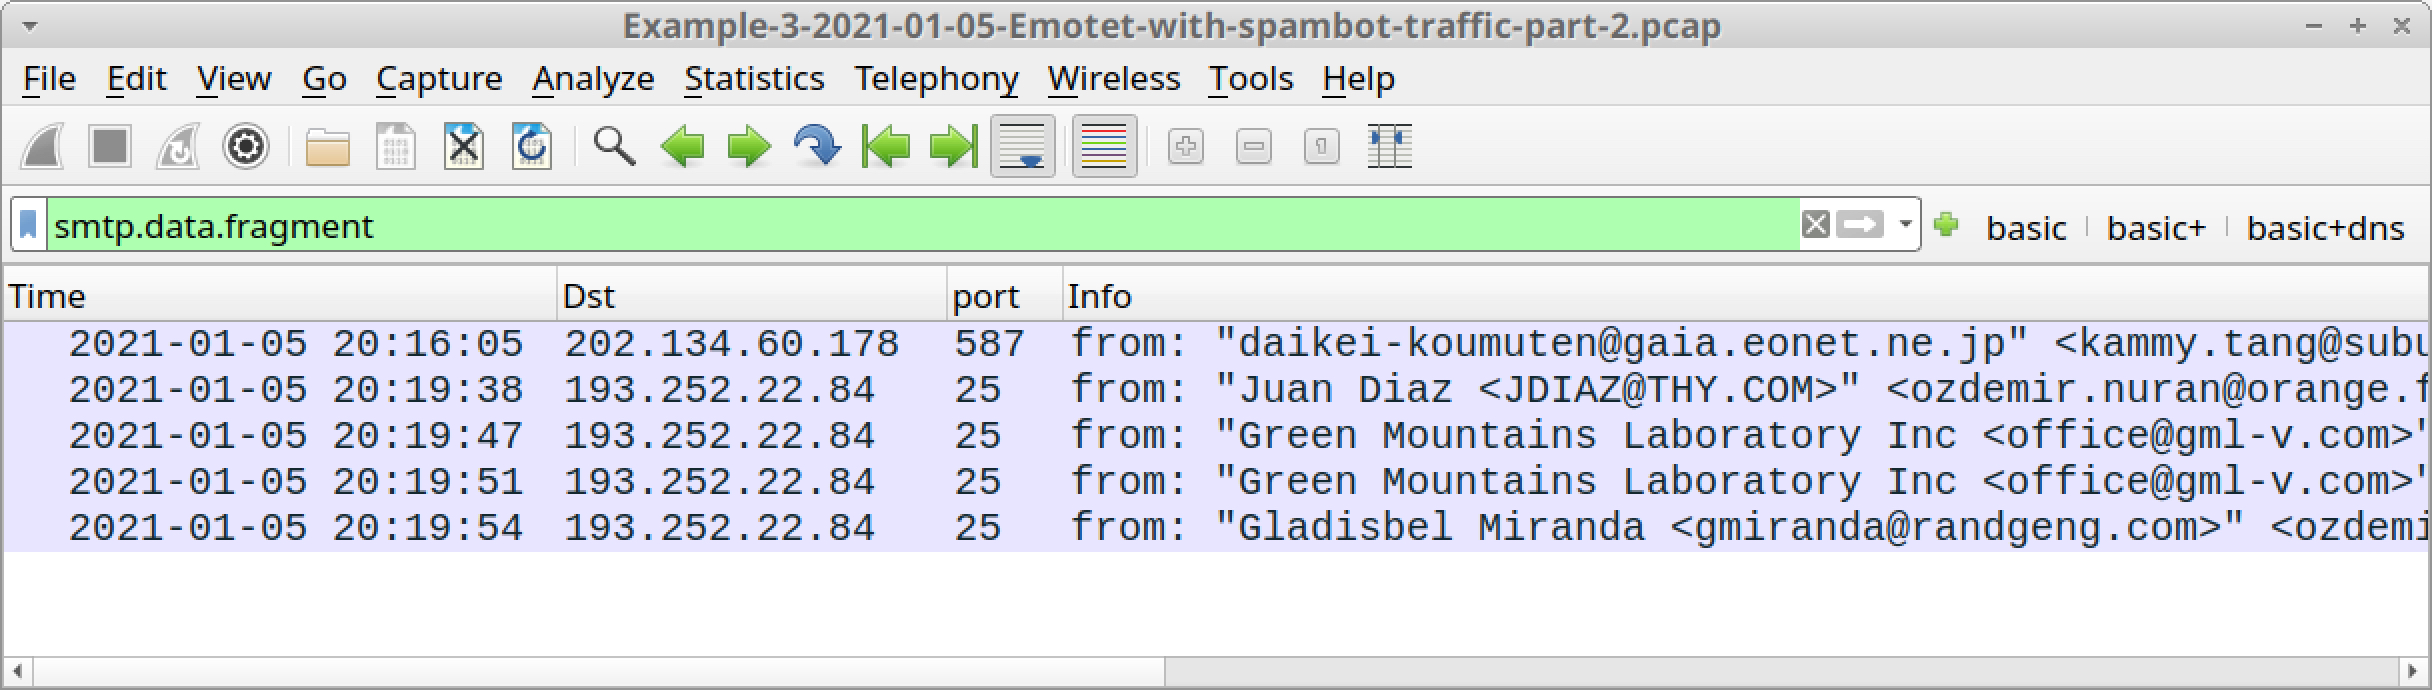 Figure 22. Filtering for indicators of unencrypted SMTP from spambot traffic.